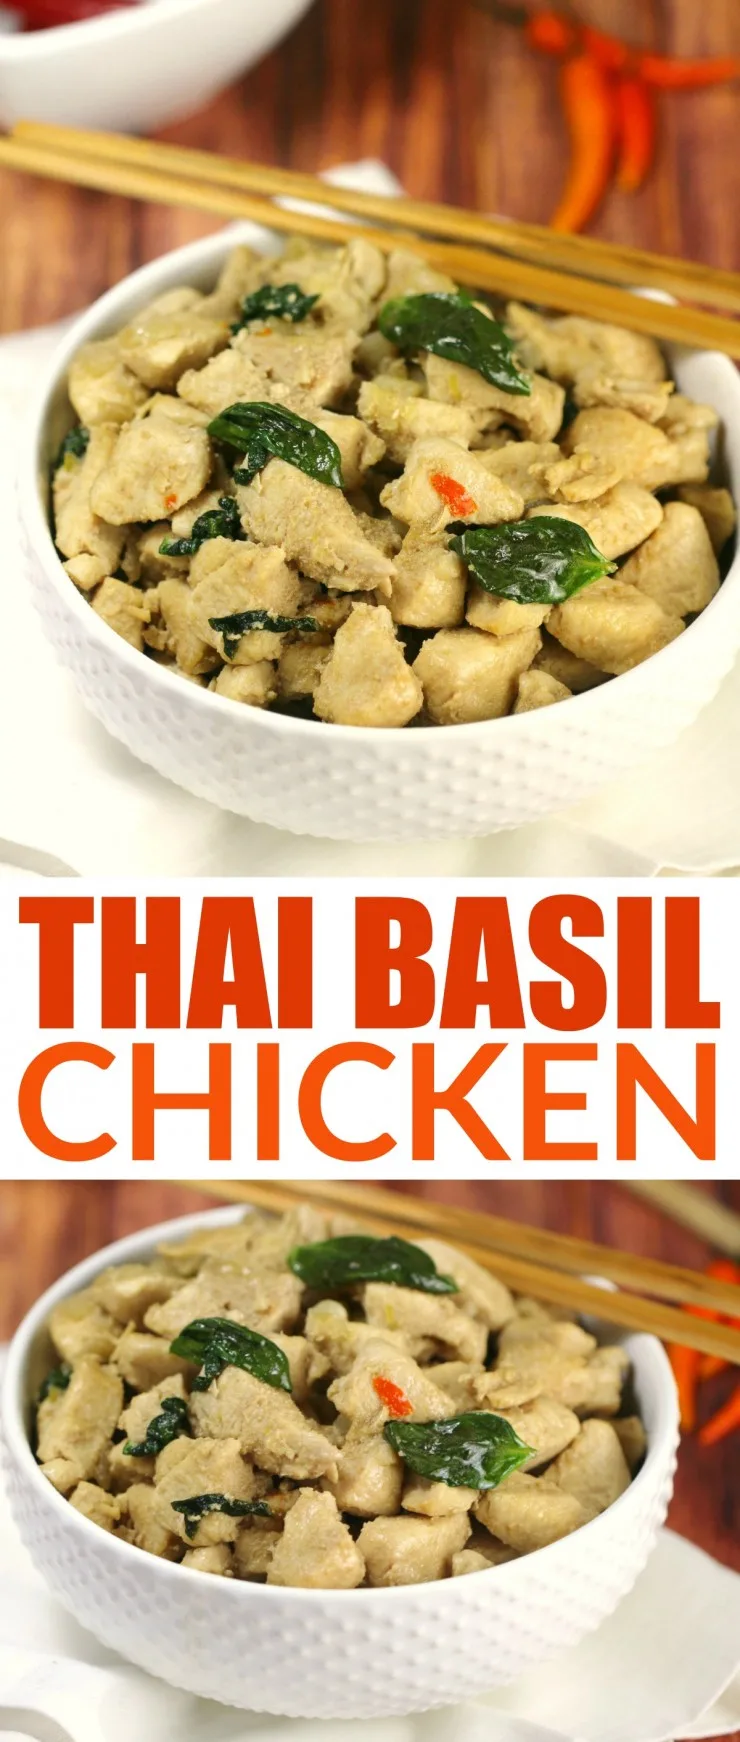 This Thai Basil Chicken recipe is a healthy makeover of a take-out favourite, it's even a great #21DayFix recipe but still full of flavour. 